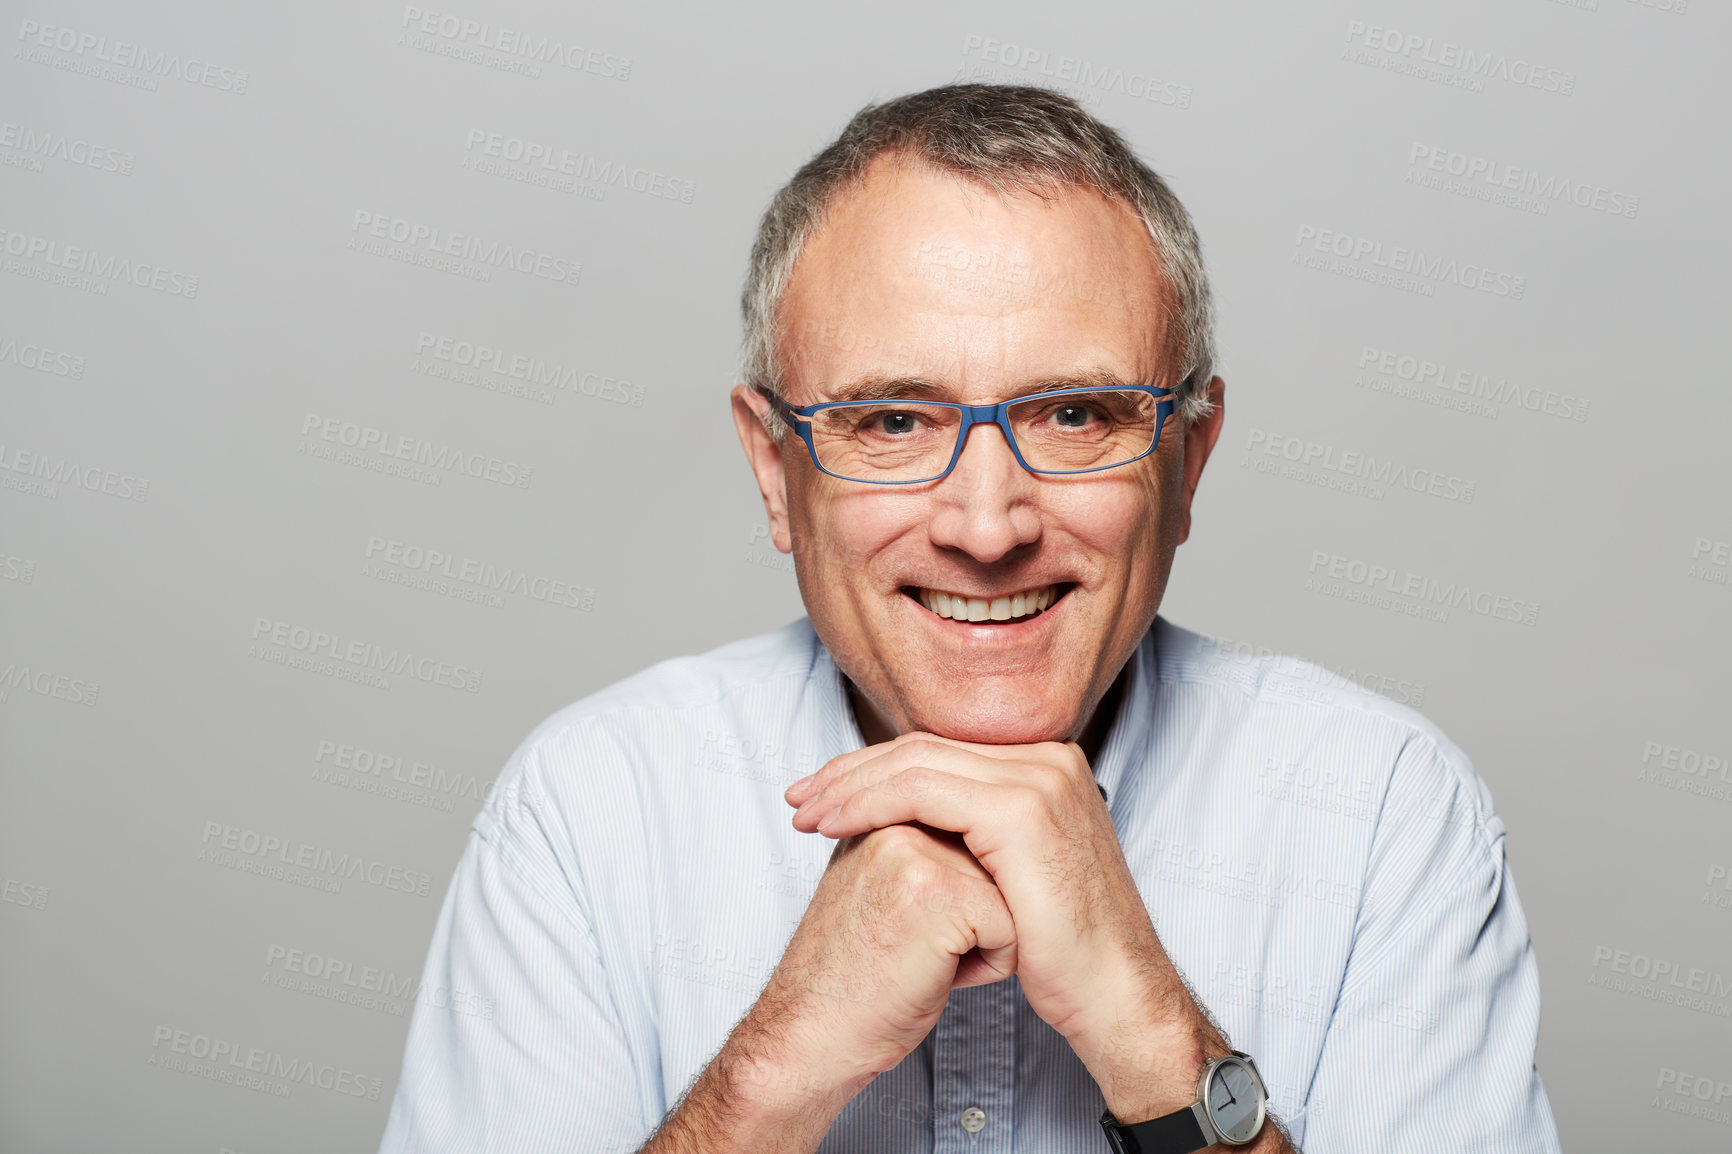 Buy stock photo Studio portrait of a mature man smiling at the camera